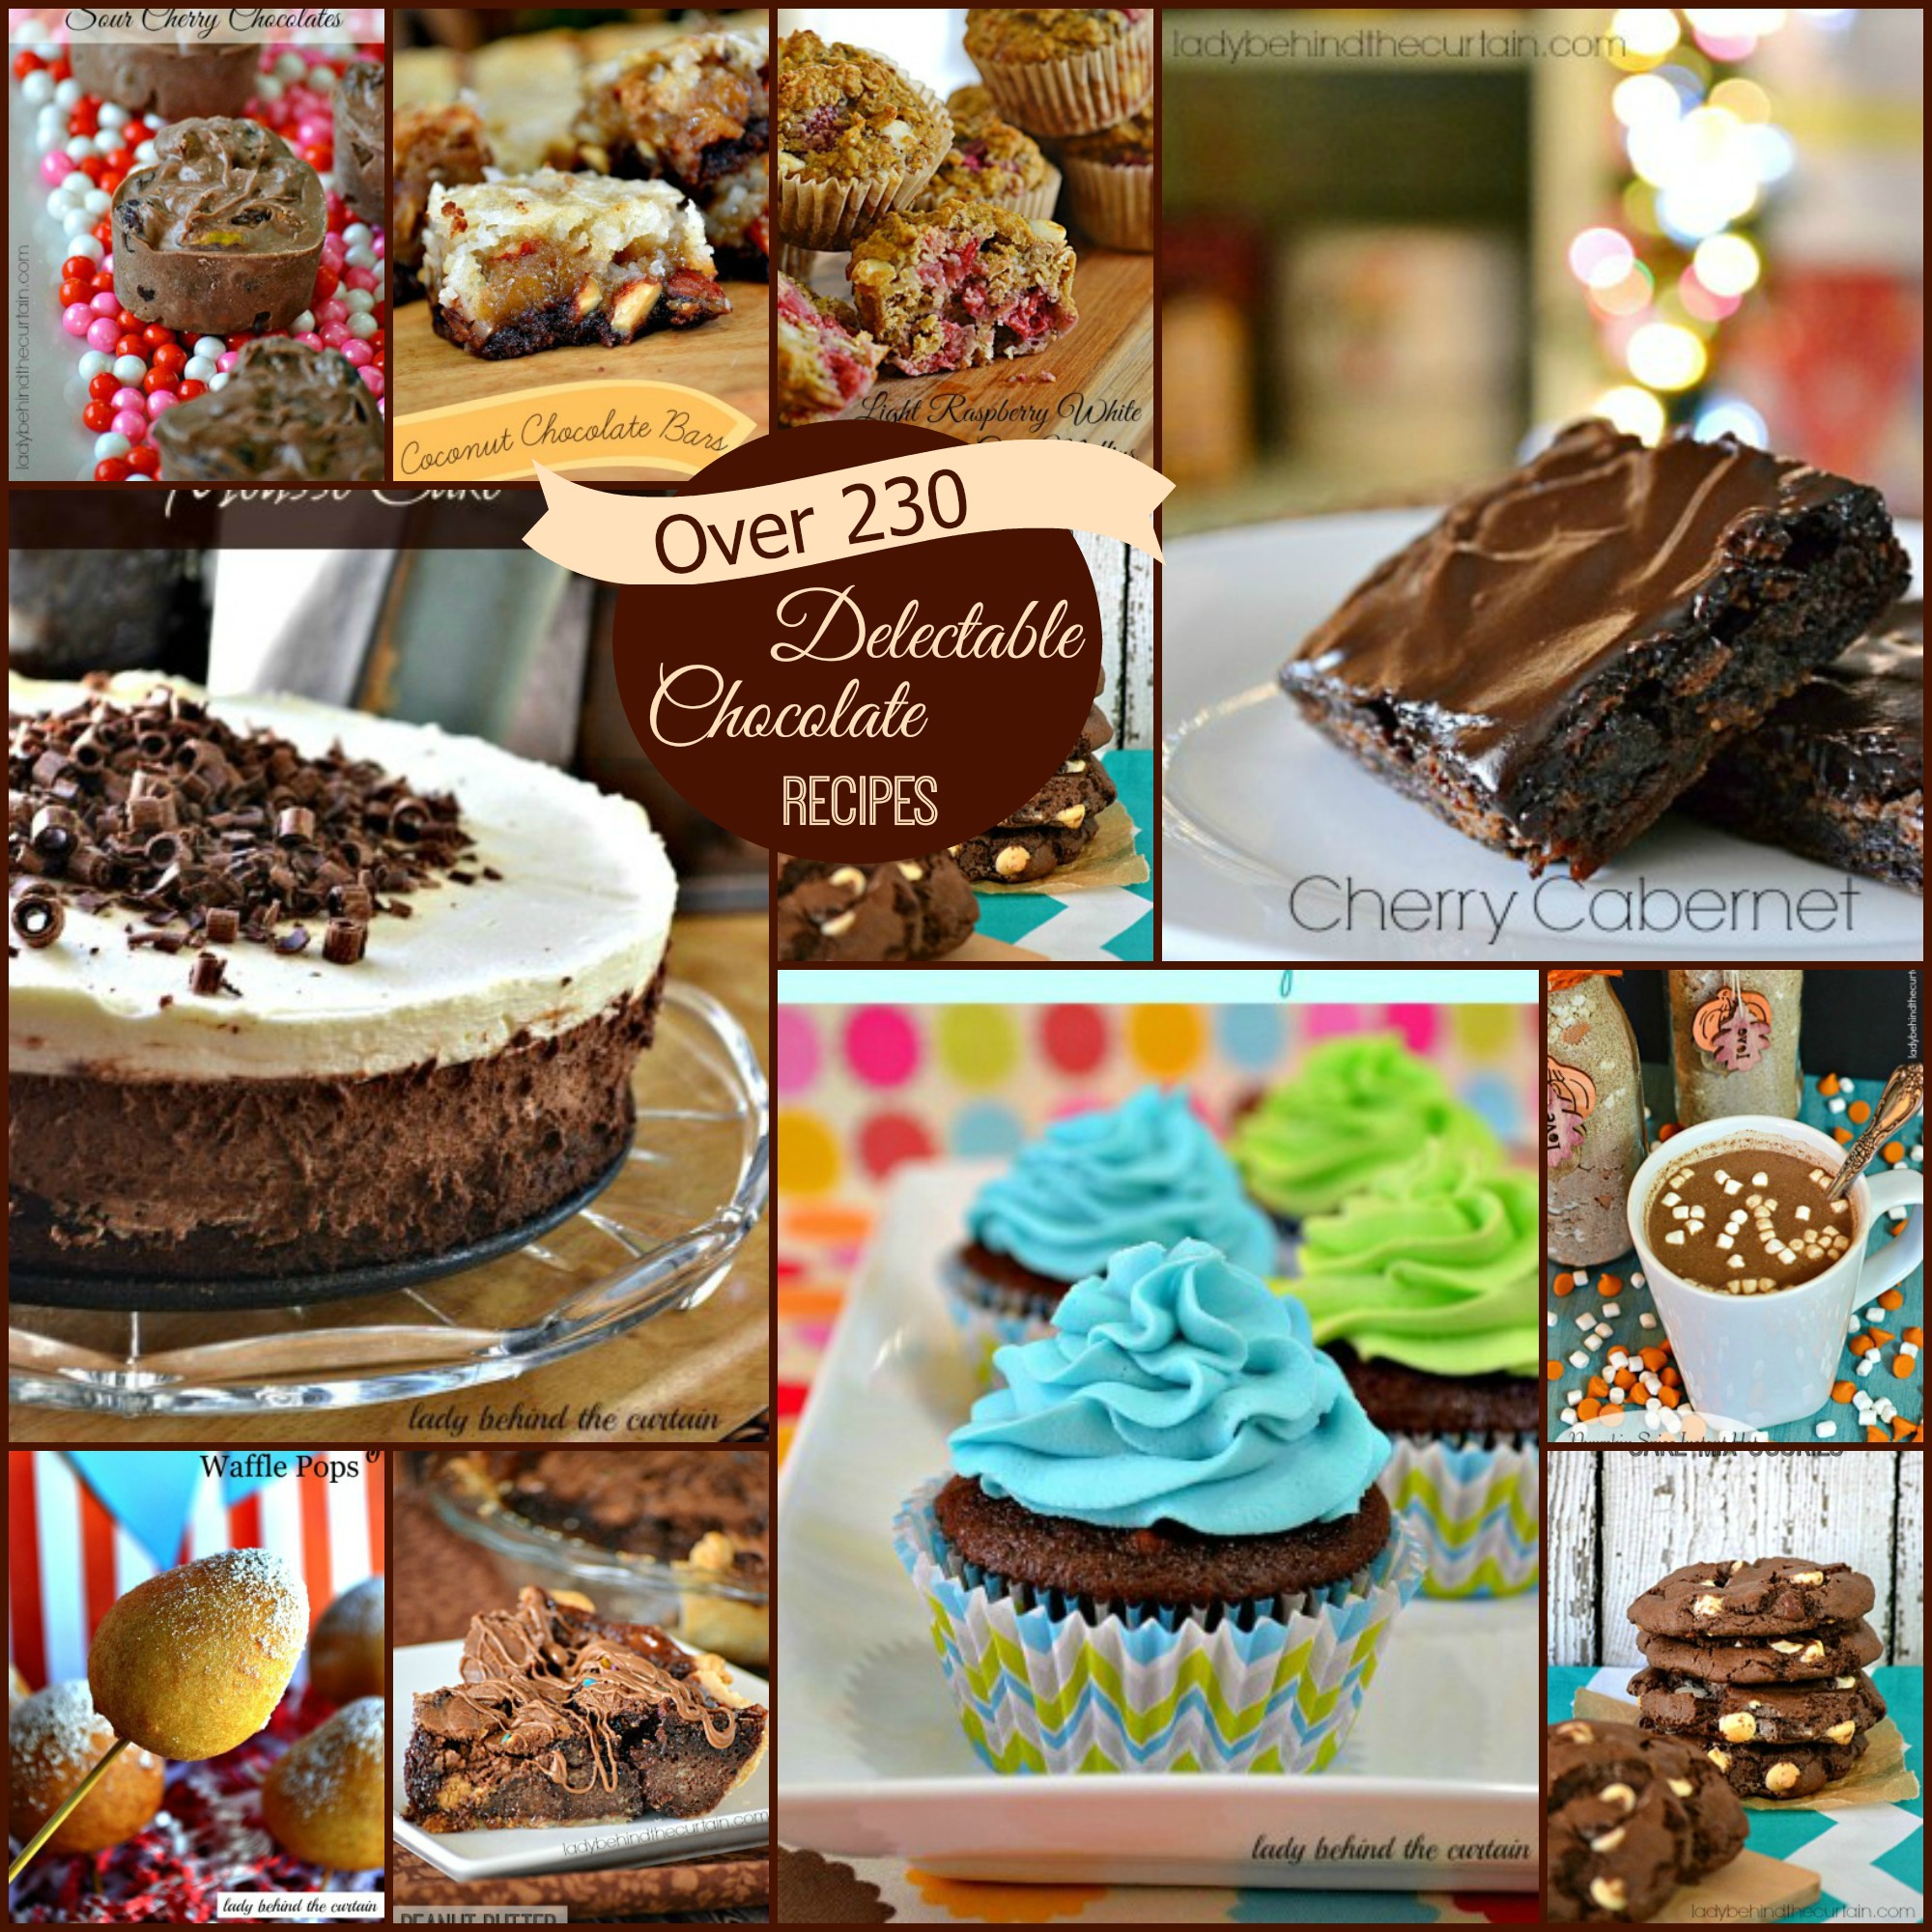 Over 230 Delectable Chocolate Recipes